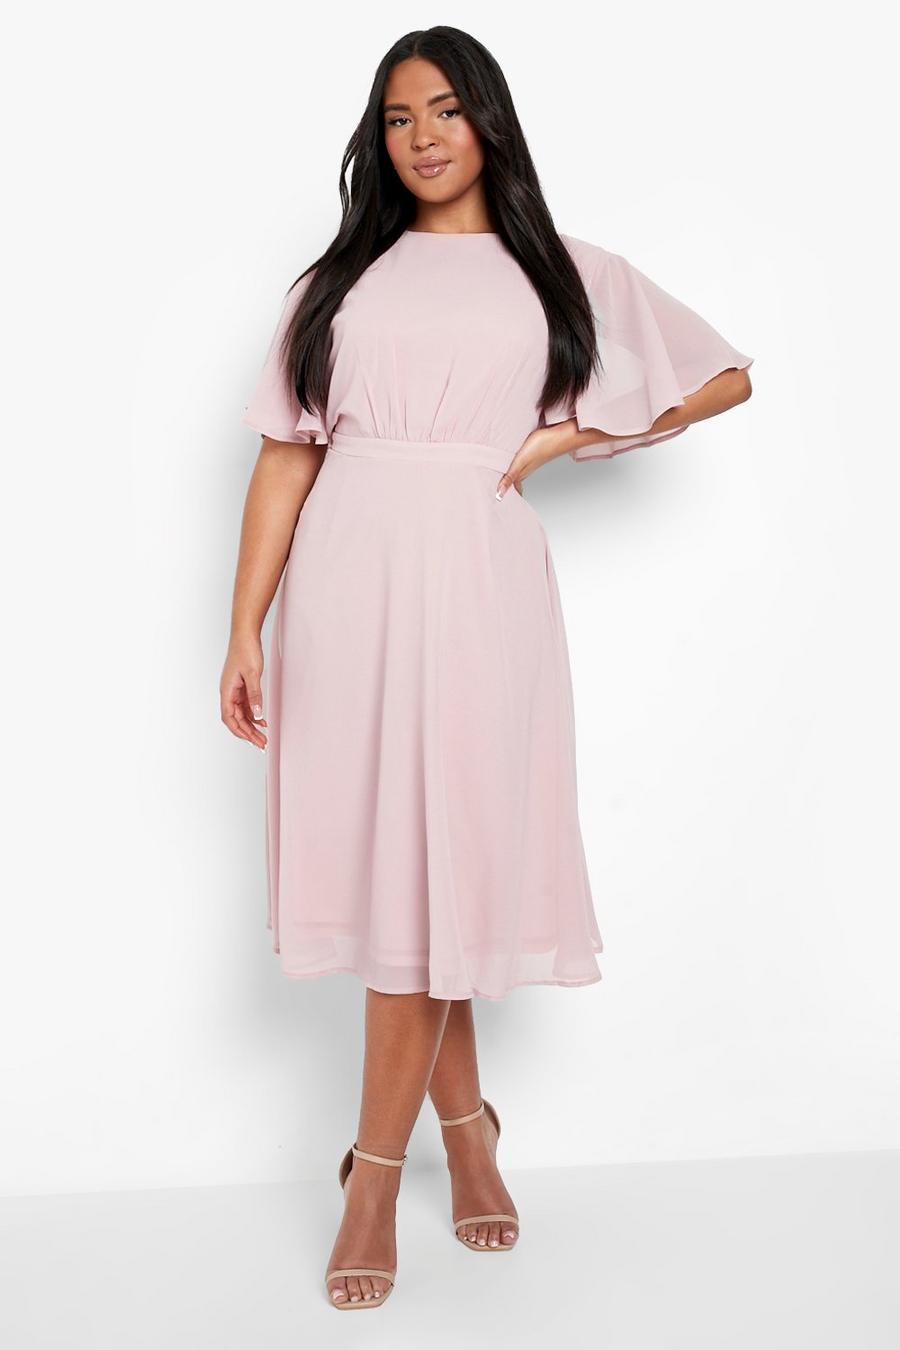 Grande taille - Robe patineuse habillée à manches courtes, Soft pink